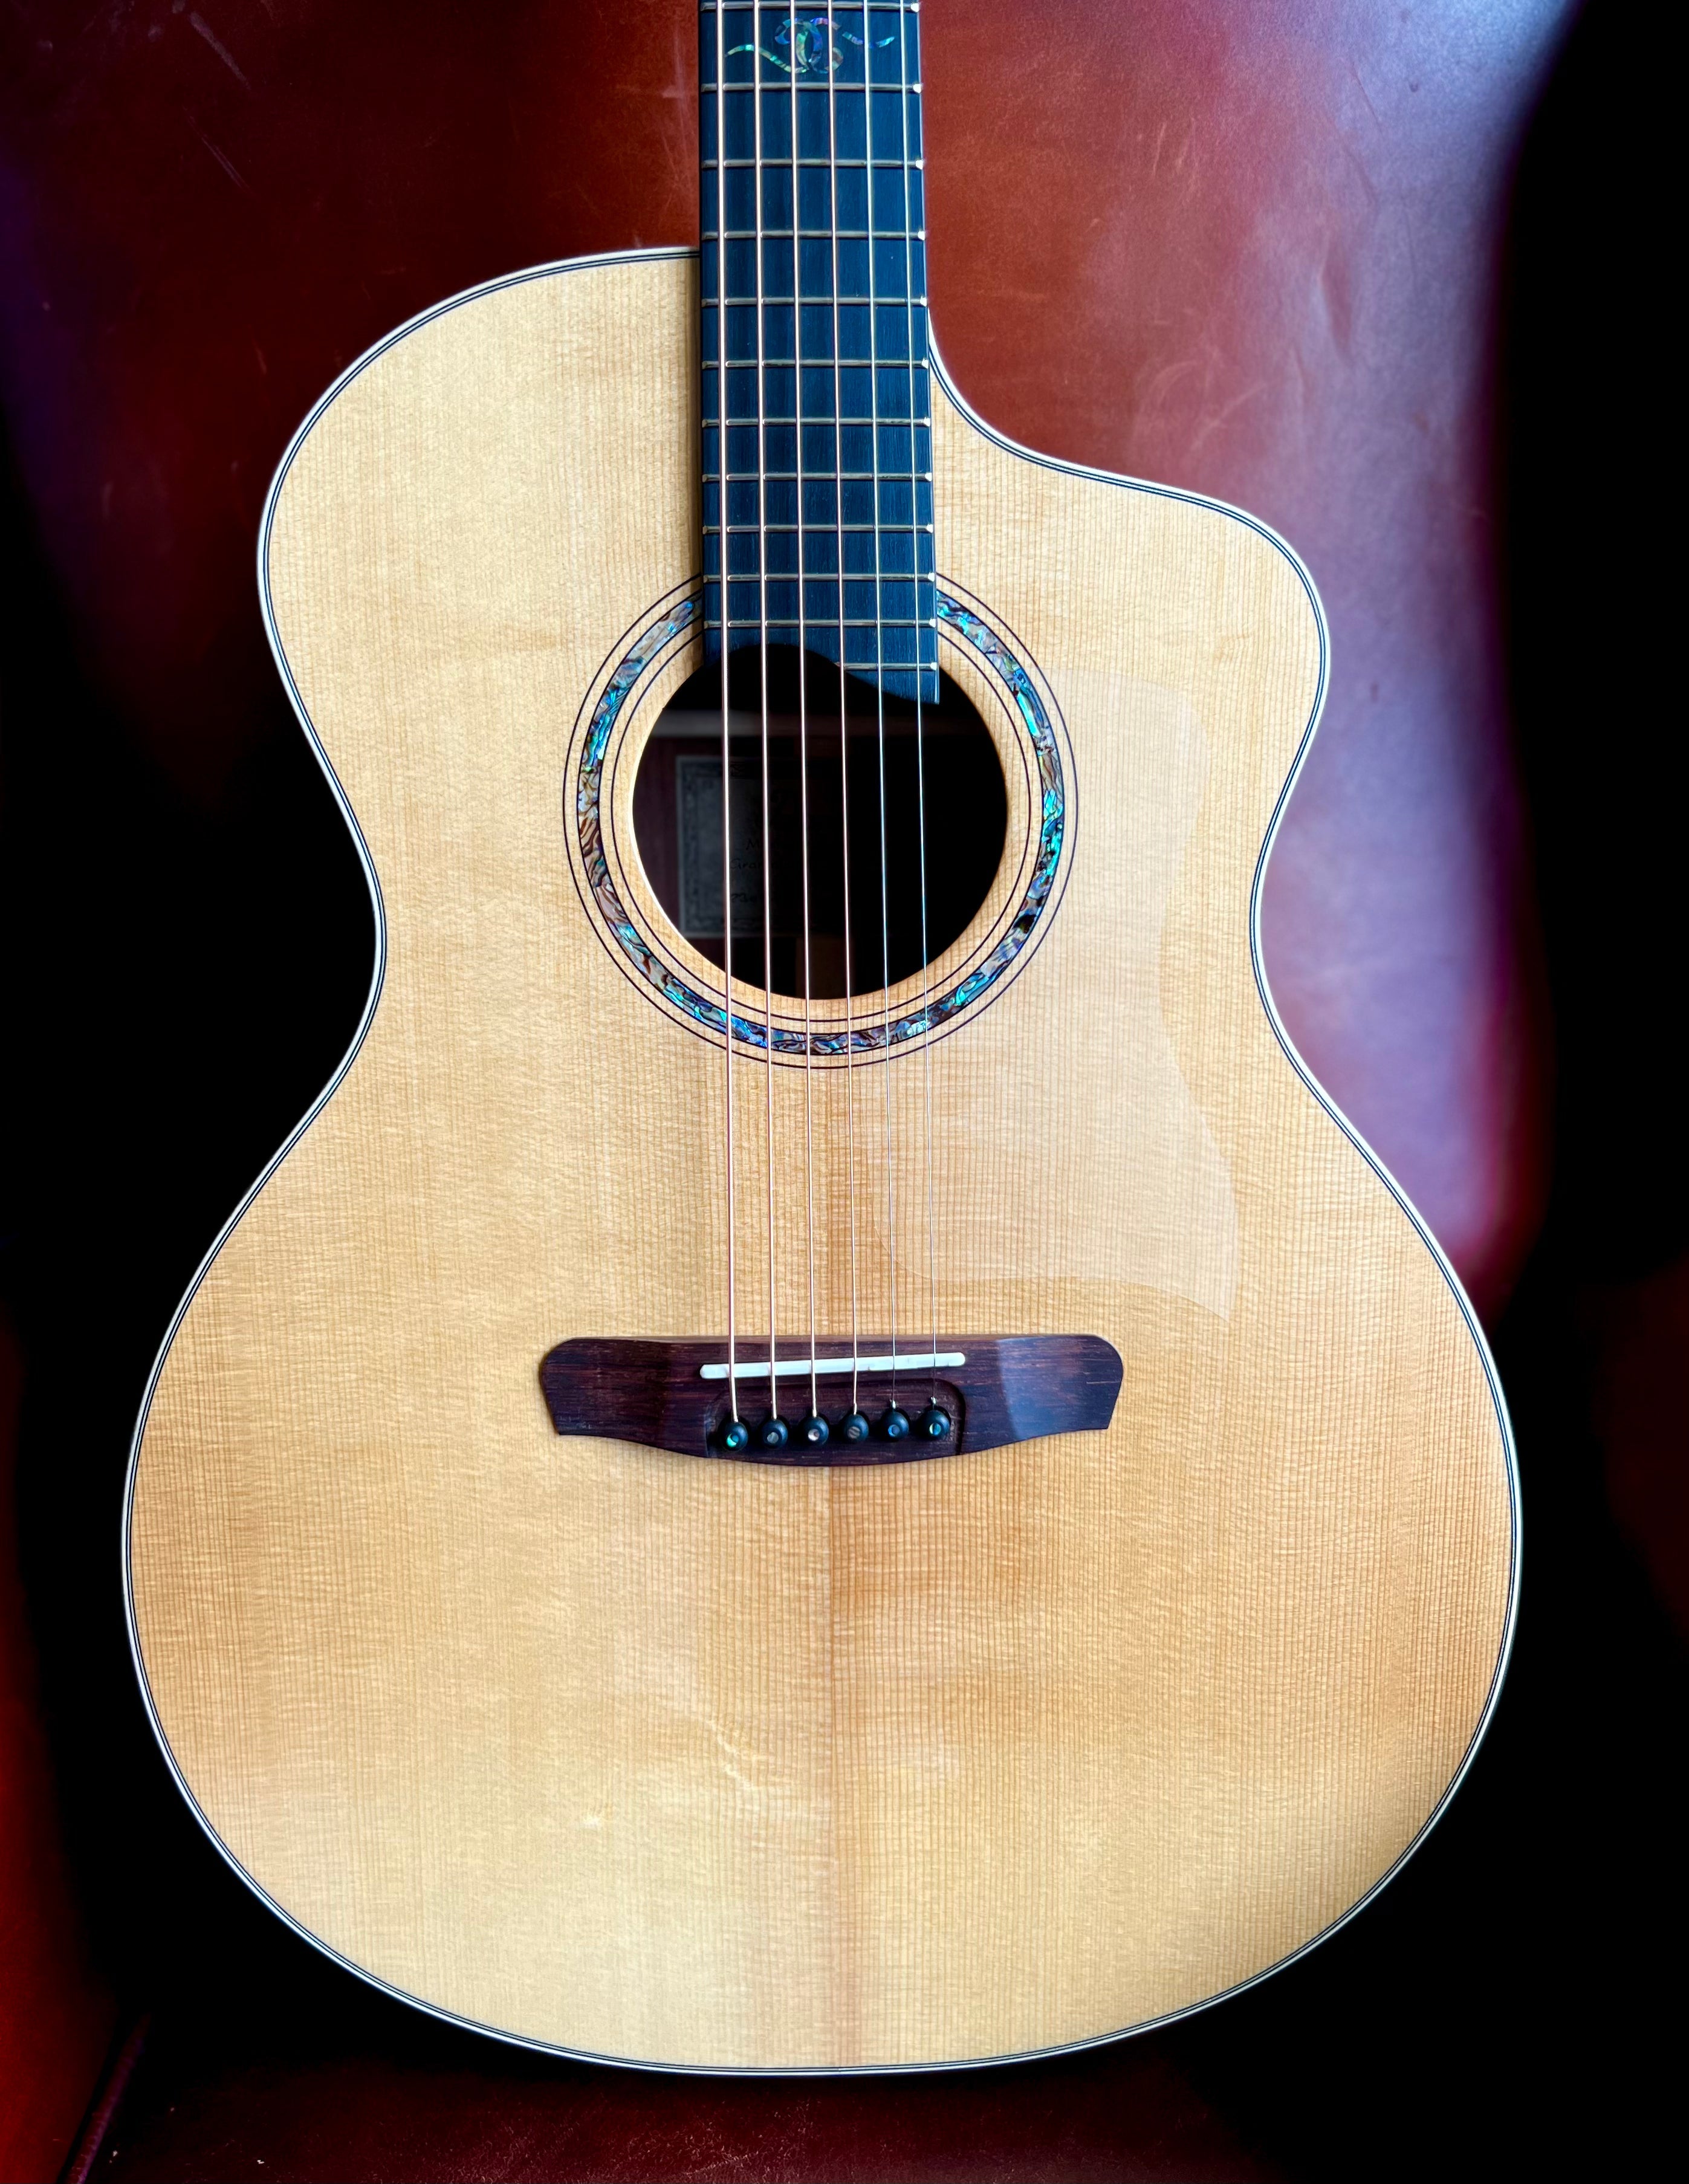 Dowina Granadillo GAC TSWS Deluxe Masters Series (Torrified Swiss Moon Spruce), Acoustic Guitar for sale at Richards Guitars.